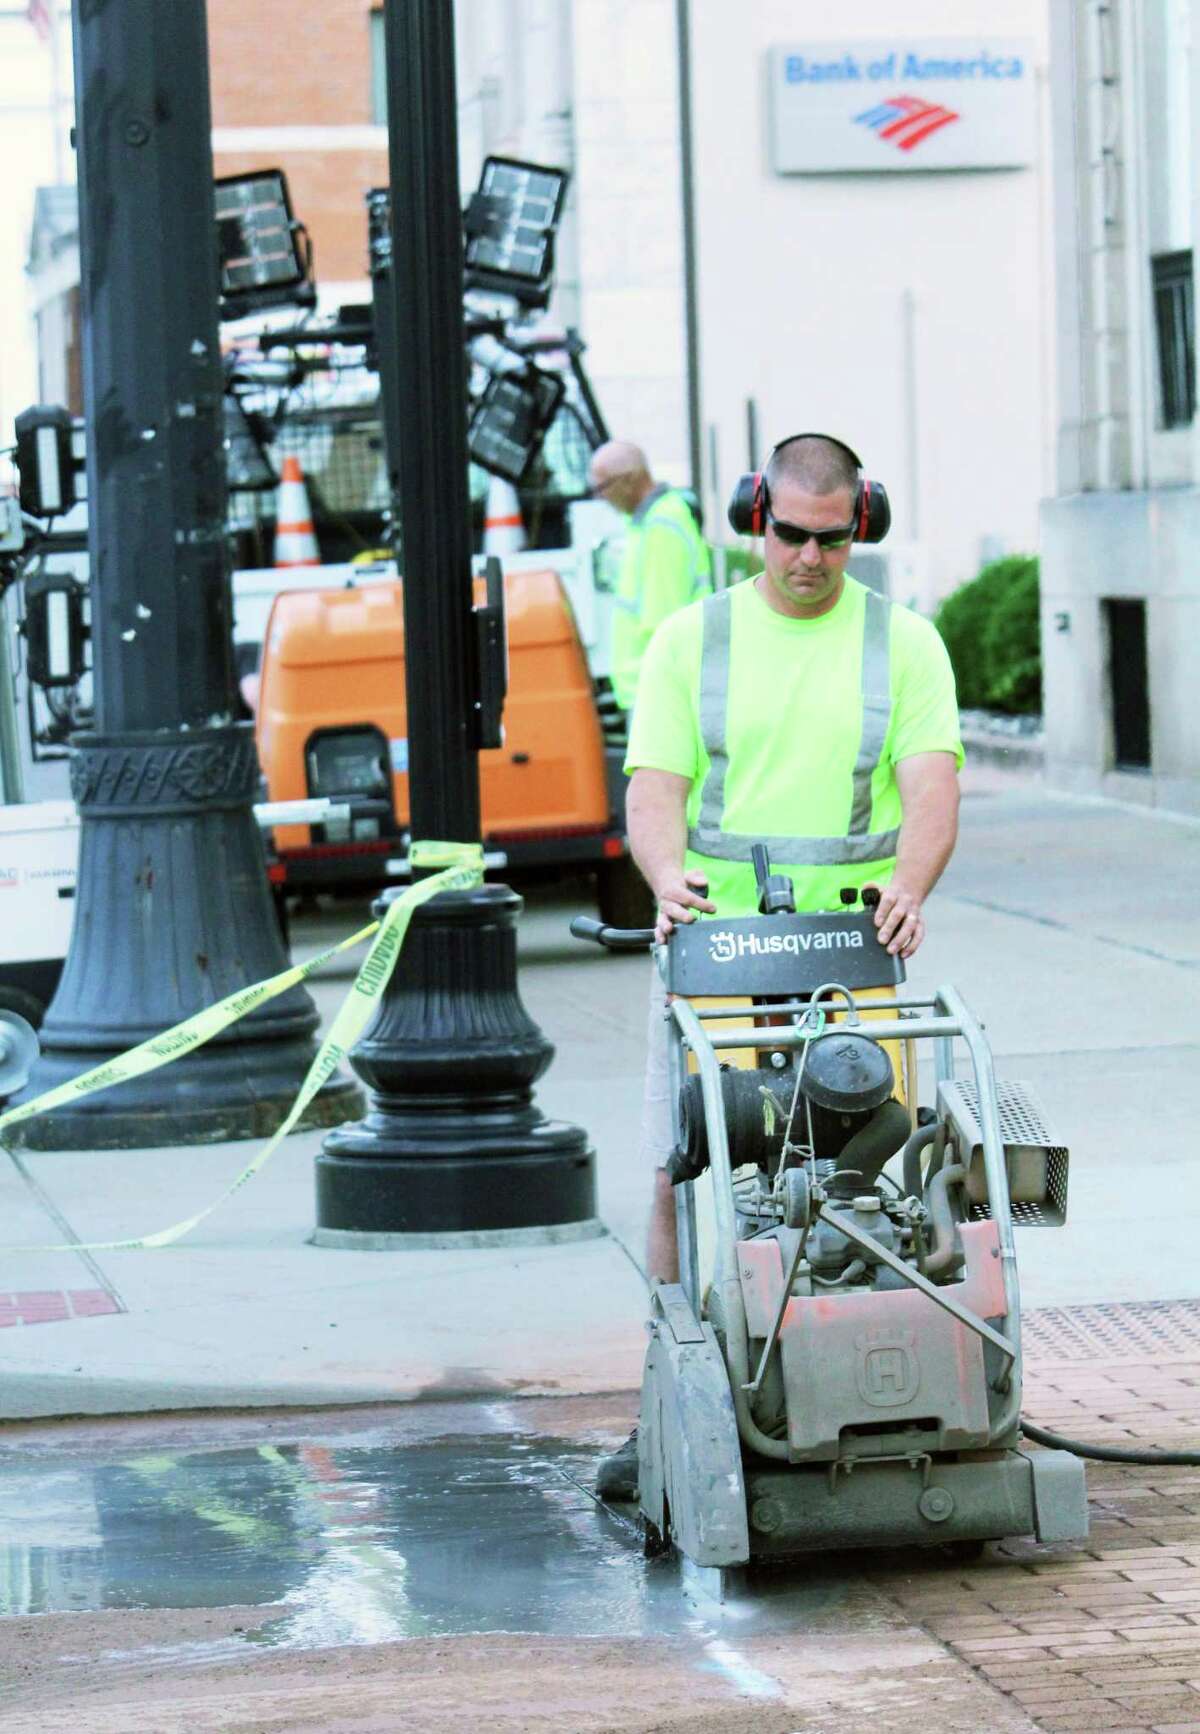 Crews repair the roadway on Main Street at the corner of Court Street Friday night after a major water main break at caused water to be reduced to a trickle at about six businesses in a block of Main Street.